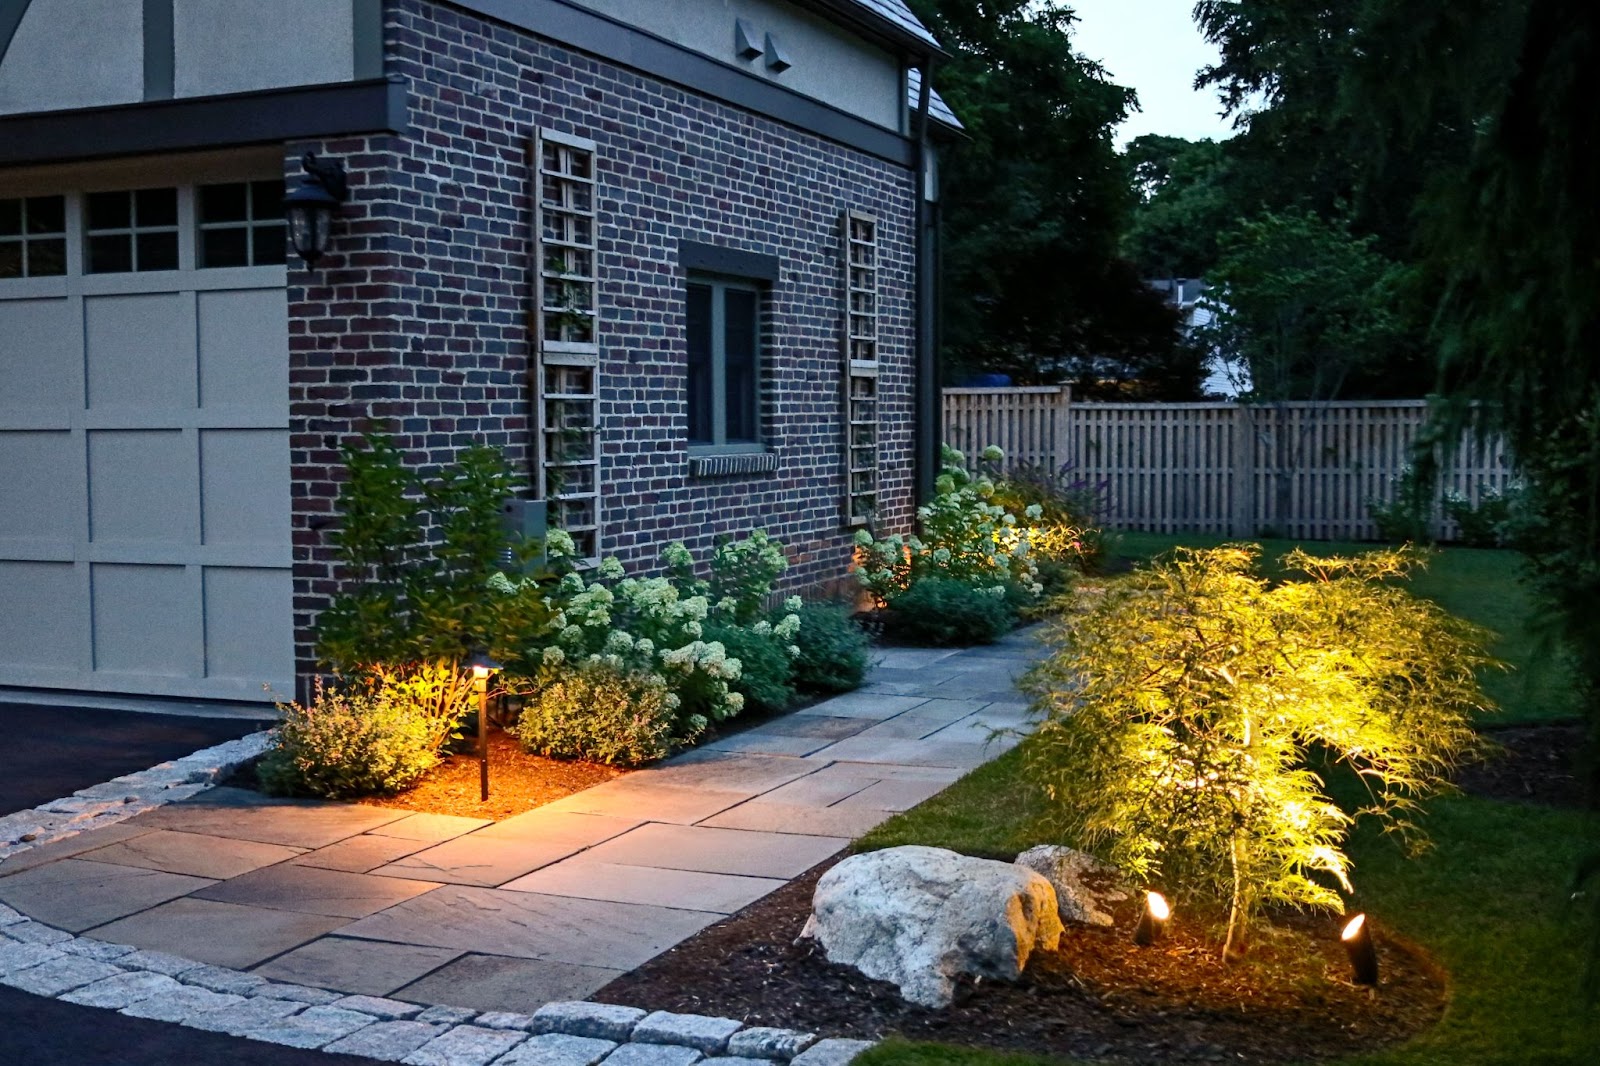 Path lighting is a feature of this landscape design